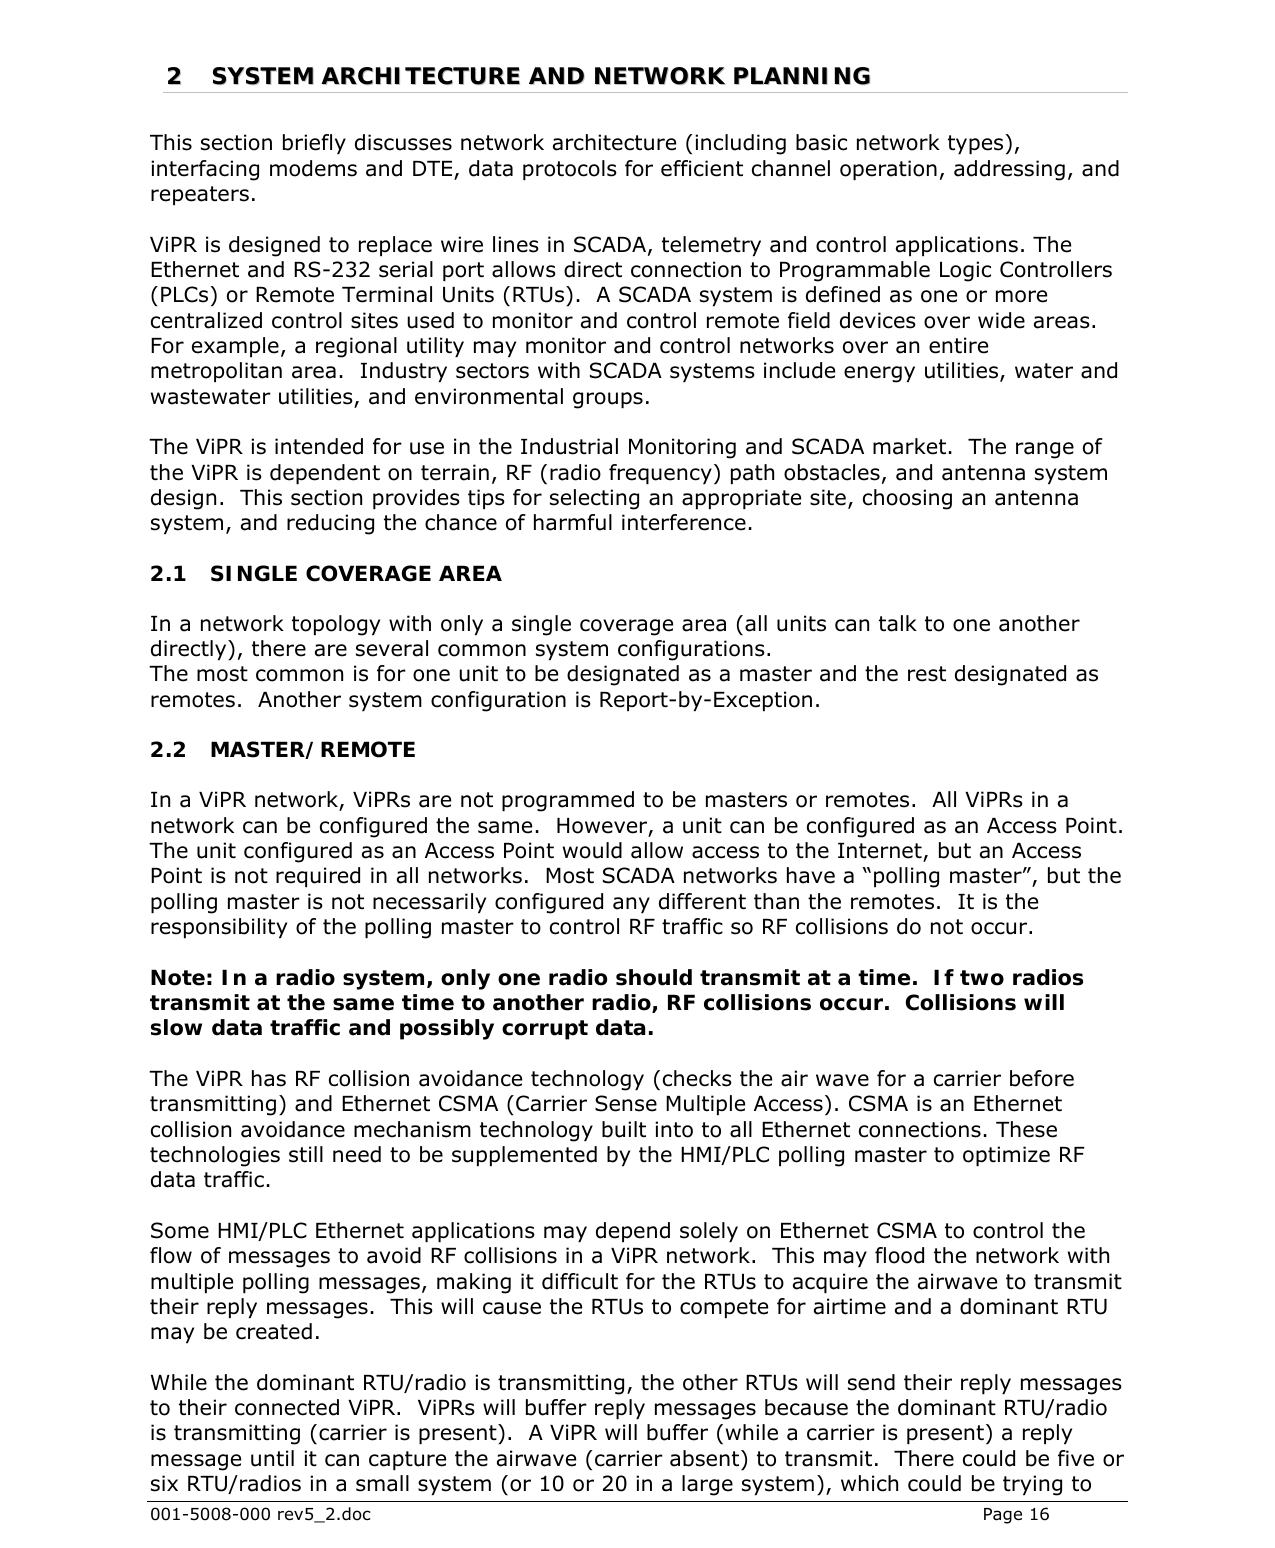  001-5008-000 rev5_2.doc    Page 16 22  SSYYSSTTEEMM  AARRCCHHIITTEECCTTUURREE  AANNDD  NNEETTWWOORRKK  PPLLAANNNNIINNGG  This section briefly discusses network architecture (including basic network types), interfacing modems and DTE, data protocols for efficient channel operation, addressing, and repeaters.   ViPR is designed to replace wire lines in SCADA, telemetry and control applications. The Ethernet and RS-232 serial port allows direct connection to Programmable Logic Controllers (PLCs) or Remote Terminal Units (RTUs).  A SCADA system is defined as one or more centralized control sites used to monitor and control remote field devices over wide areas.  For example, a regional utility may monitor and control networks over an entire metropolitan area.  Industry sectors with SCADA systems include energy utilities, water and wastewater utilities, and environmental groups.  The ViPR is intended for use in the Industrial Monitoring and SCADA market.  The range of the ViPR is dependent on terrain, RF (radio frequency) path obstacles, and antenna system design.  This section provides tips for selecting an appropriate site, choosing an antenna system, and reducing the chance of harmful interference.  2.1 SINGLE COVERAGE AREA In a network topology with only a single coverage area (all units can talk to one another directly), there are several common system configurations. The most common is for one unit to be designated as a master and the rest designated as remotes.  Another system configuration is Report-by-Exception.  2.2 MASTER/REMOTE In a ViPR network, ViPRs are not programmed to be masters or remotes.  All ViPRs in a network can be configured the same.  However, a unit can be configured as an Access Point.  The unit configured as an Access Point would allow access to the Internet, but an Access Point is not required in all networks.  Most SCADA networks have a “polling master”, but the polling master is not necessarily configured any different than the remotes.  It is the responsibility of the polling master to control RF traffic so RF collisions do not occur.  Note: In a radio system, only one radio should transmit at a time.  If two radios transmit at the same time to another radio, RF collisions occur.  Collisions will slow data traffic and possibly corrupt data.  The ViPR has RF collision avoidance technology (checks the air wave for a carrier before transmitting) and Ethernet CSMA (Carrier Sense Multiple Access). CSMA is an Ethernet collision avoidance mechanism technology built into to all Ethernet connections. These technologies still need to be supplemented by the HMI/PLC polling master to optimize RF data traffic.  Some HMI/PLC Ethernet applications may depend solely on Ethernet CSMA to control the flow of messages to avoid RF collisions in a ViPR network.  This may flood the network with multiple polling messages, making it difficult for the RTUs to acquire the airwave to transmit their reply messages.  This will cause the RTUs to compete for airtime and a dominant RTU may be created.   While the dominant RTU/radio is transmitting, the other RTUs will send their reply messages to their connected ViPR.  ViPRs will buffer reply messages because the dominant RTU/radio is transmitting (carrier is present).  A ViPR will buffer (while a carrier is present) a reply message until it can capture the airwave (carrier absent) to transmit.  There could be five or six RTU/radios in a small system (or 10 or 20 in a large system), which could be trying to 